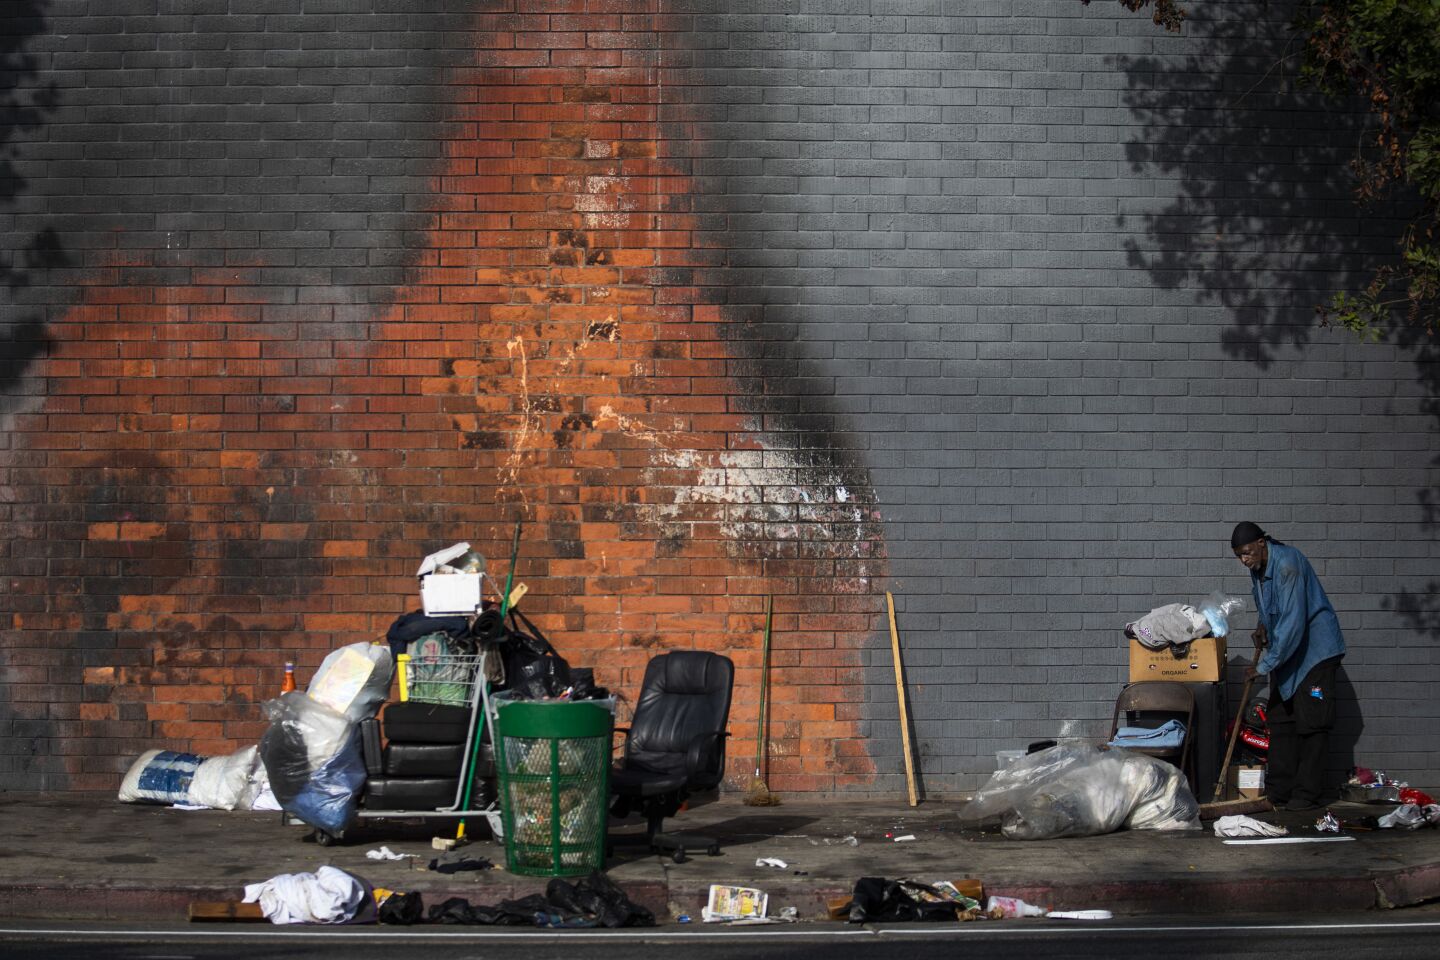 LOS ANGELES, CALIF. - NOVEMBER 12: Robert Taylor is cleaning around his encapment near the corner of 39th and Broadway in Los Angeles, Calif. on Tuesday, Nov. 12, 2019. The paint on the building next to where he sleeps on the sidewalk remains chard following a fire. Still he remains positive. He has been working with outreach workers on getting housing. (Francine Orr / Los Angeles Times)